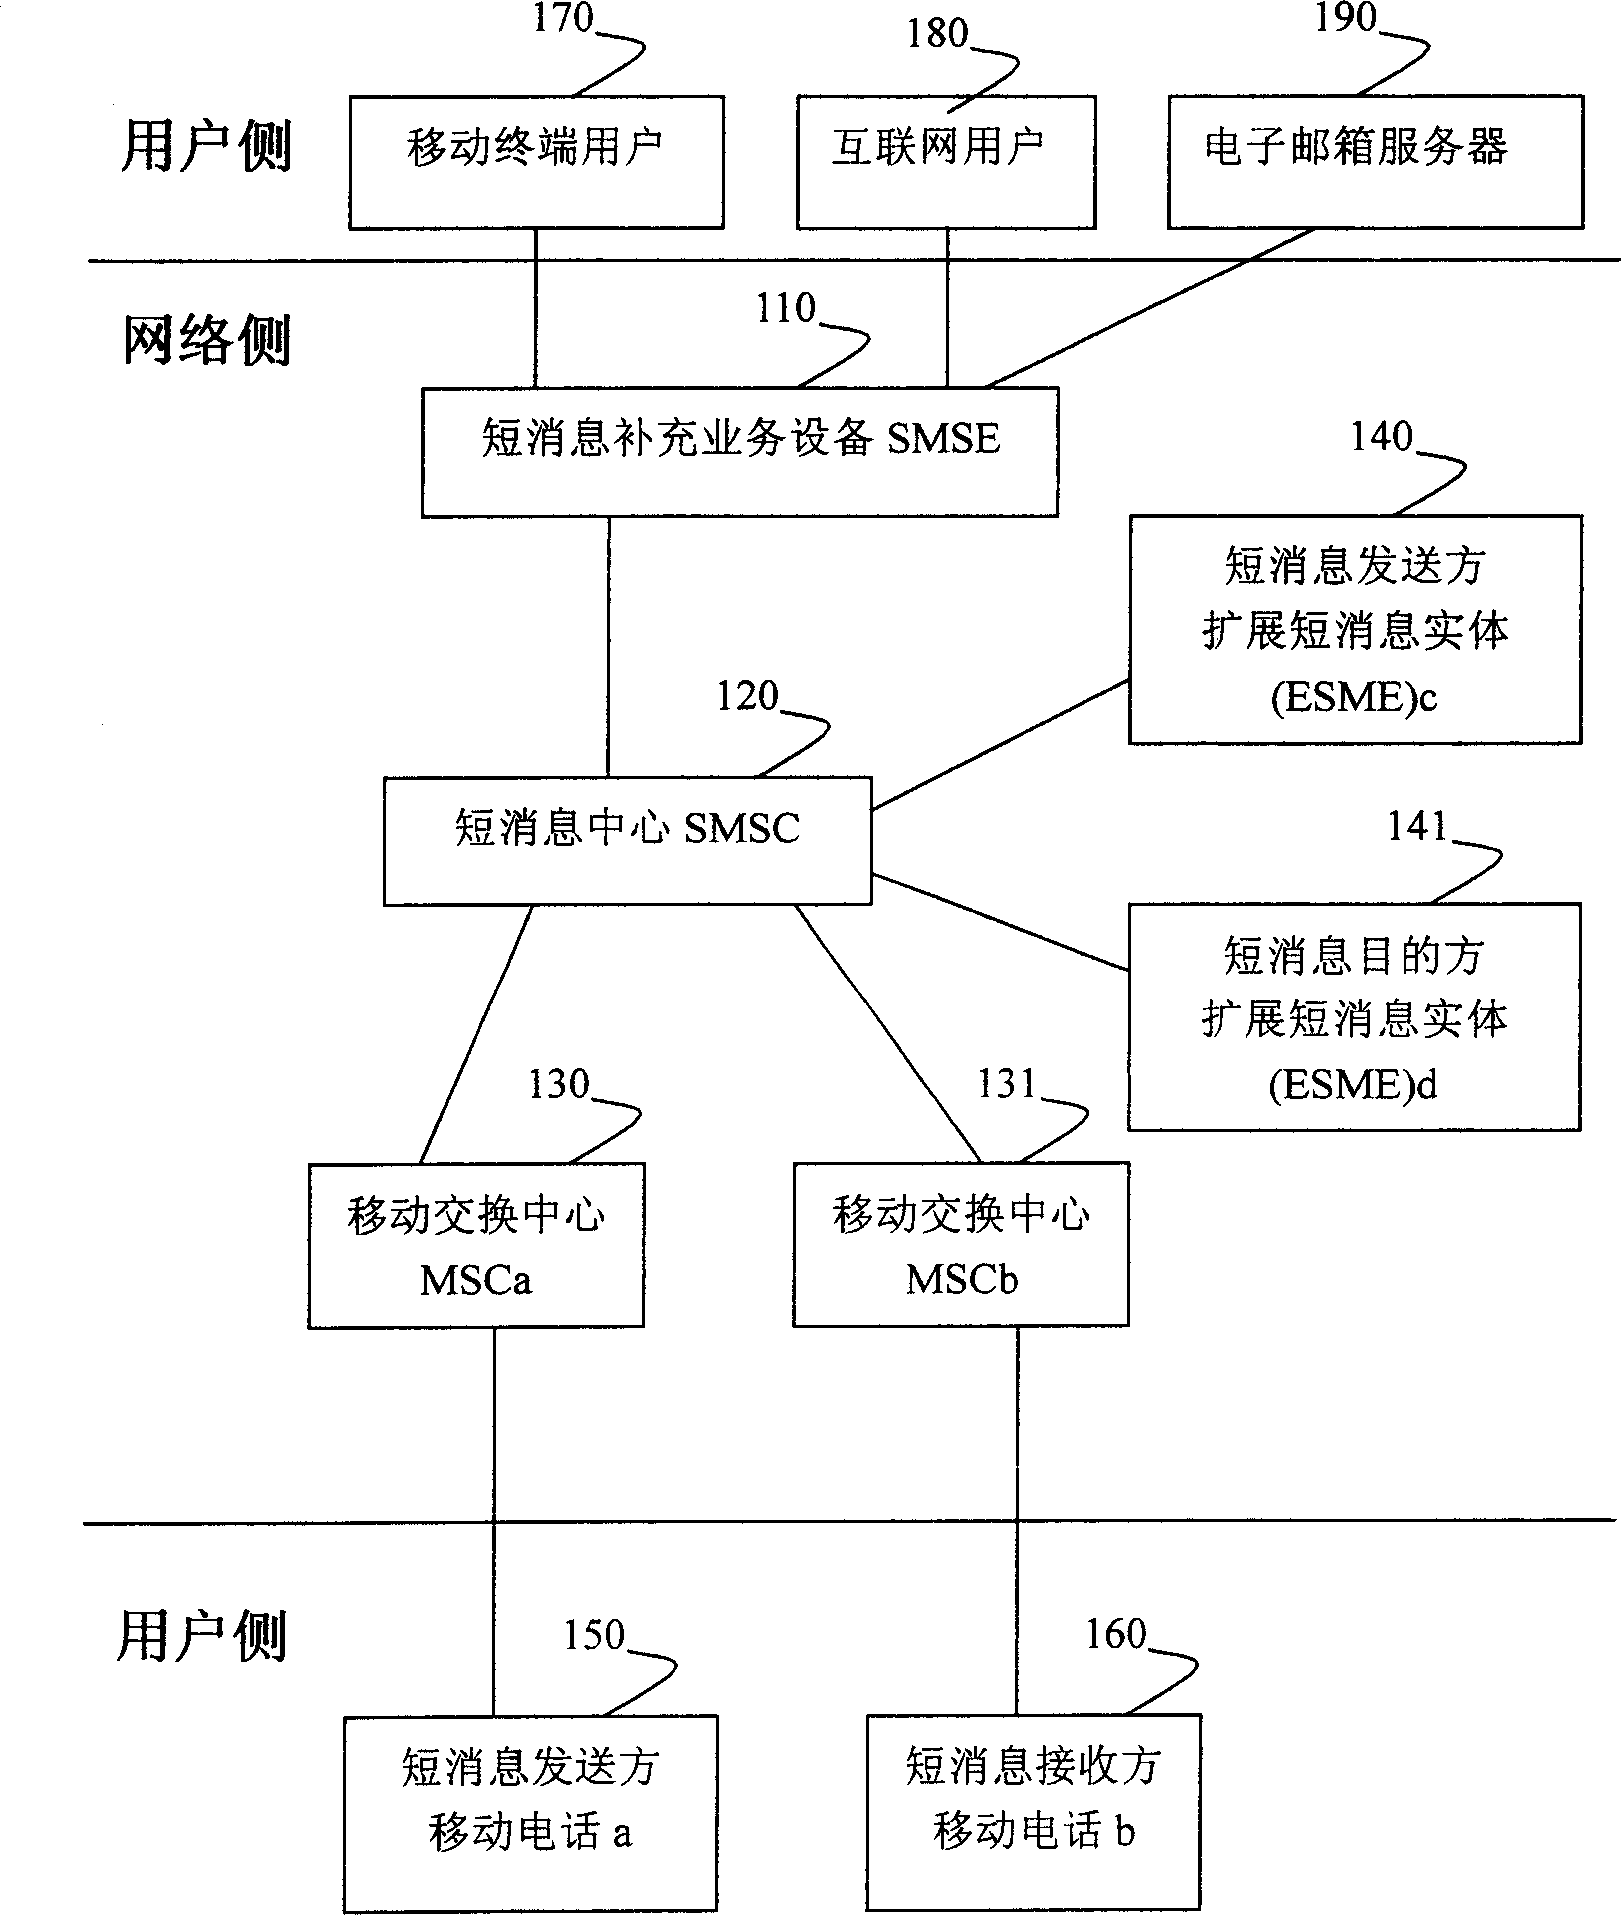 System and method for implementing short message additional service